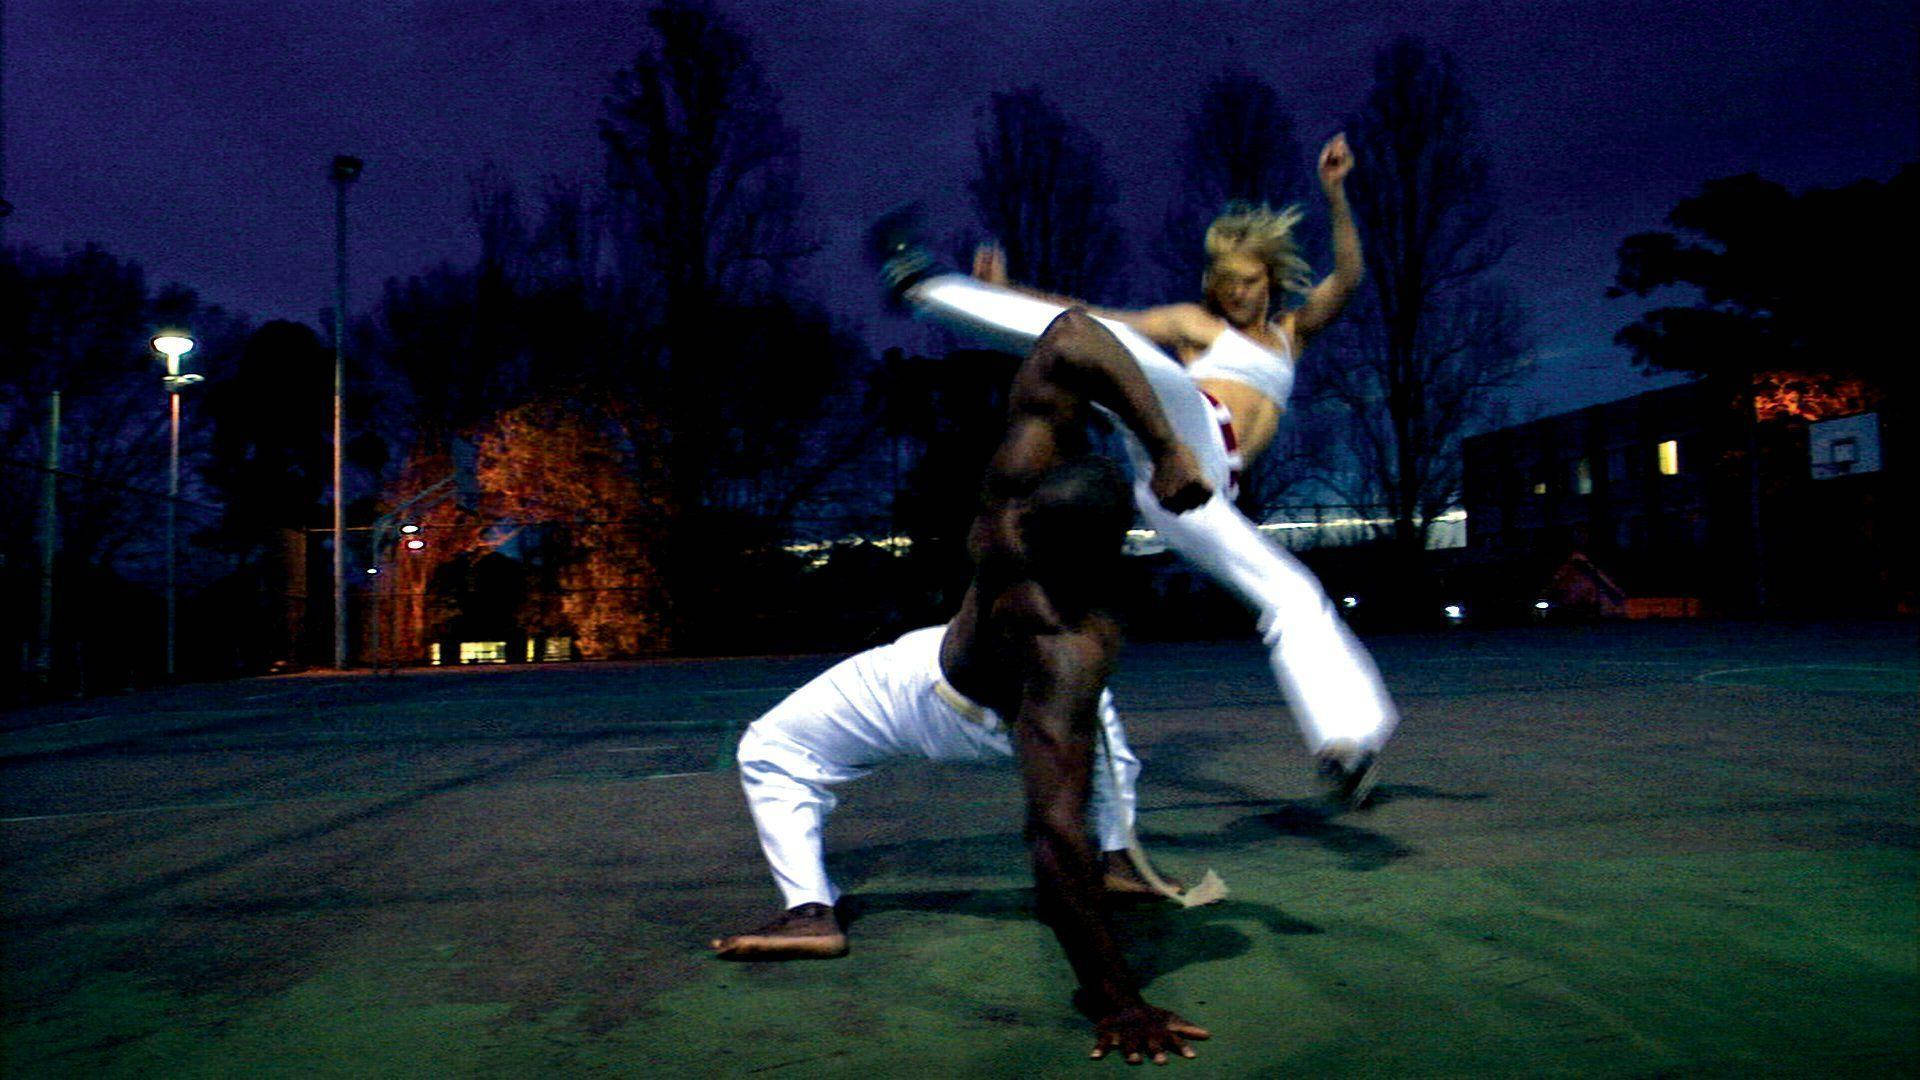 Capoeira Fight In The Evening Wallpaper